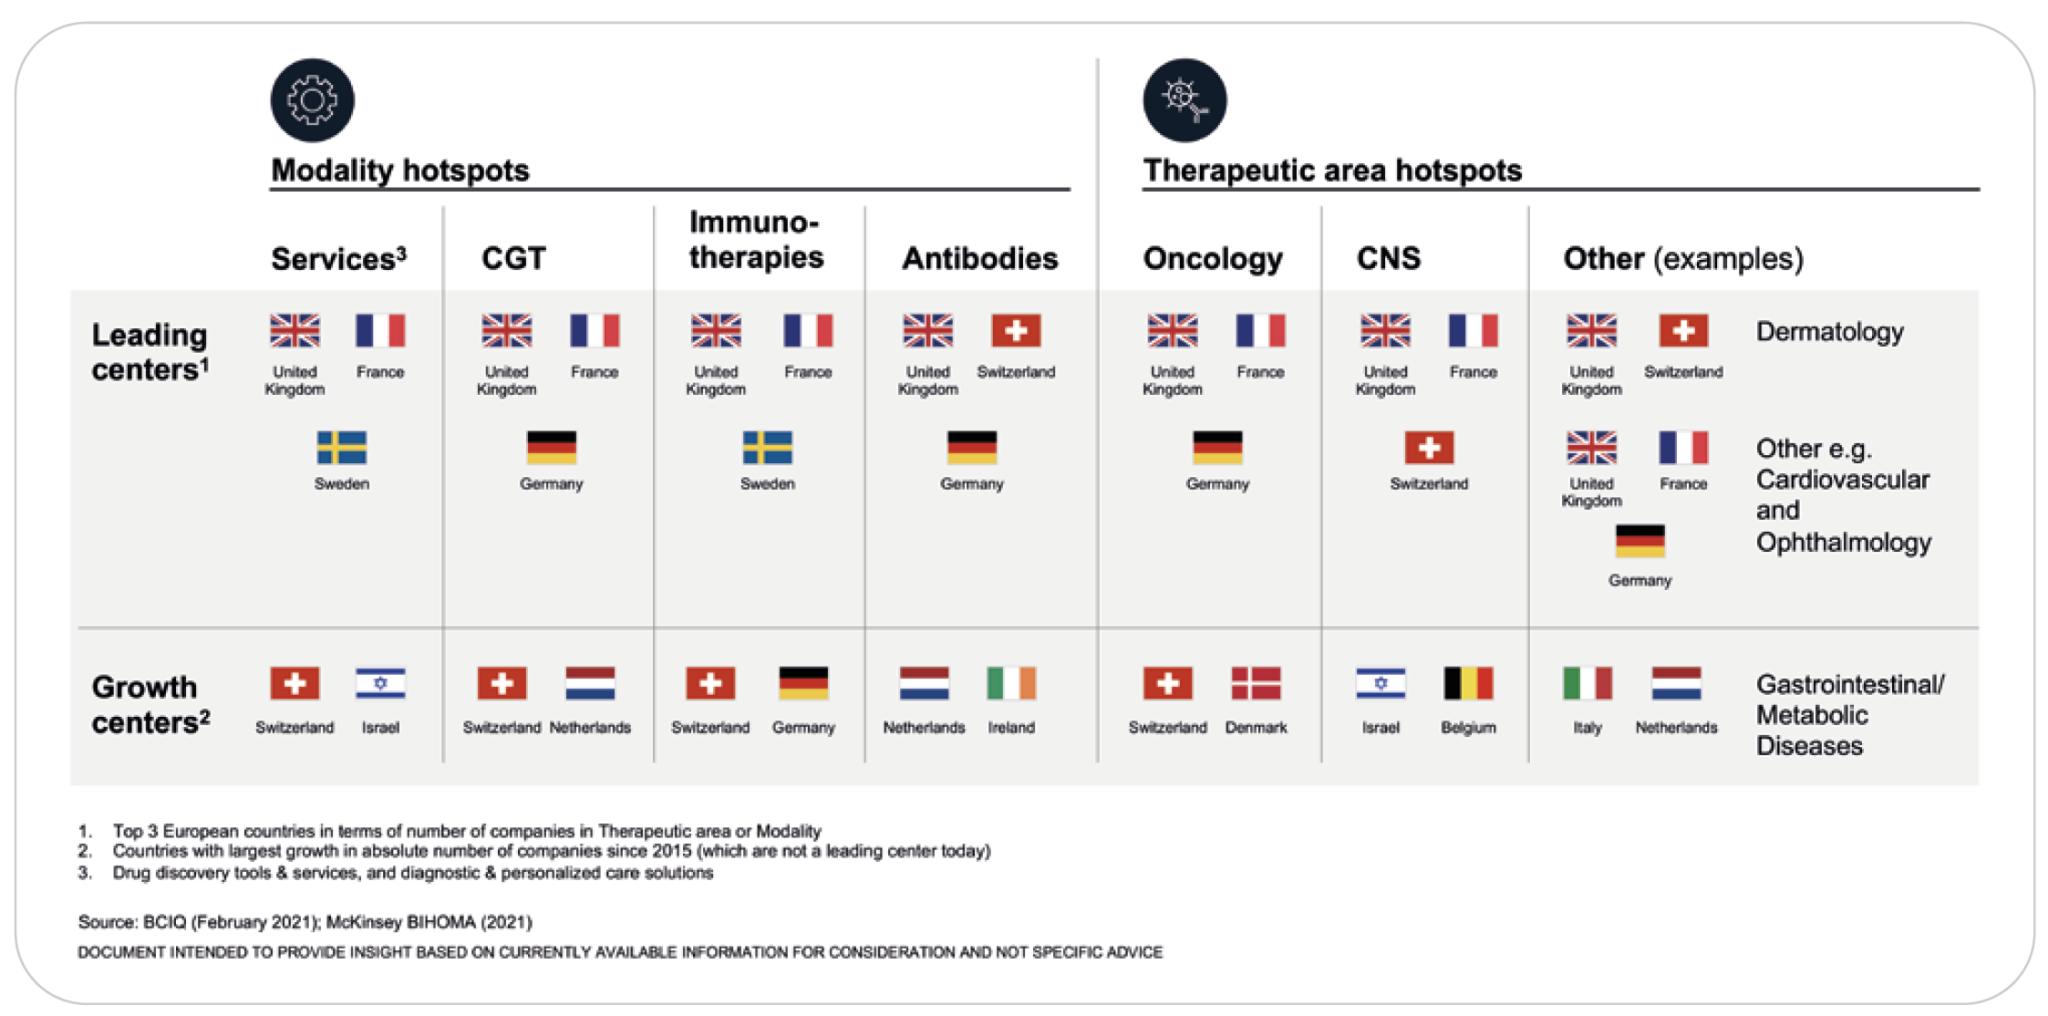 Modality and therapeutic area hotspots in Europe 2021